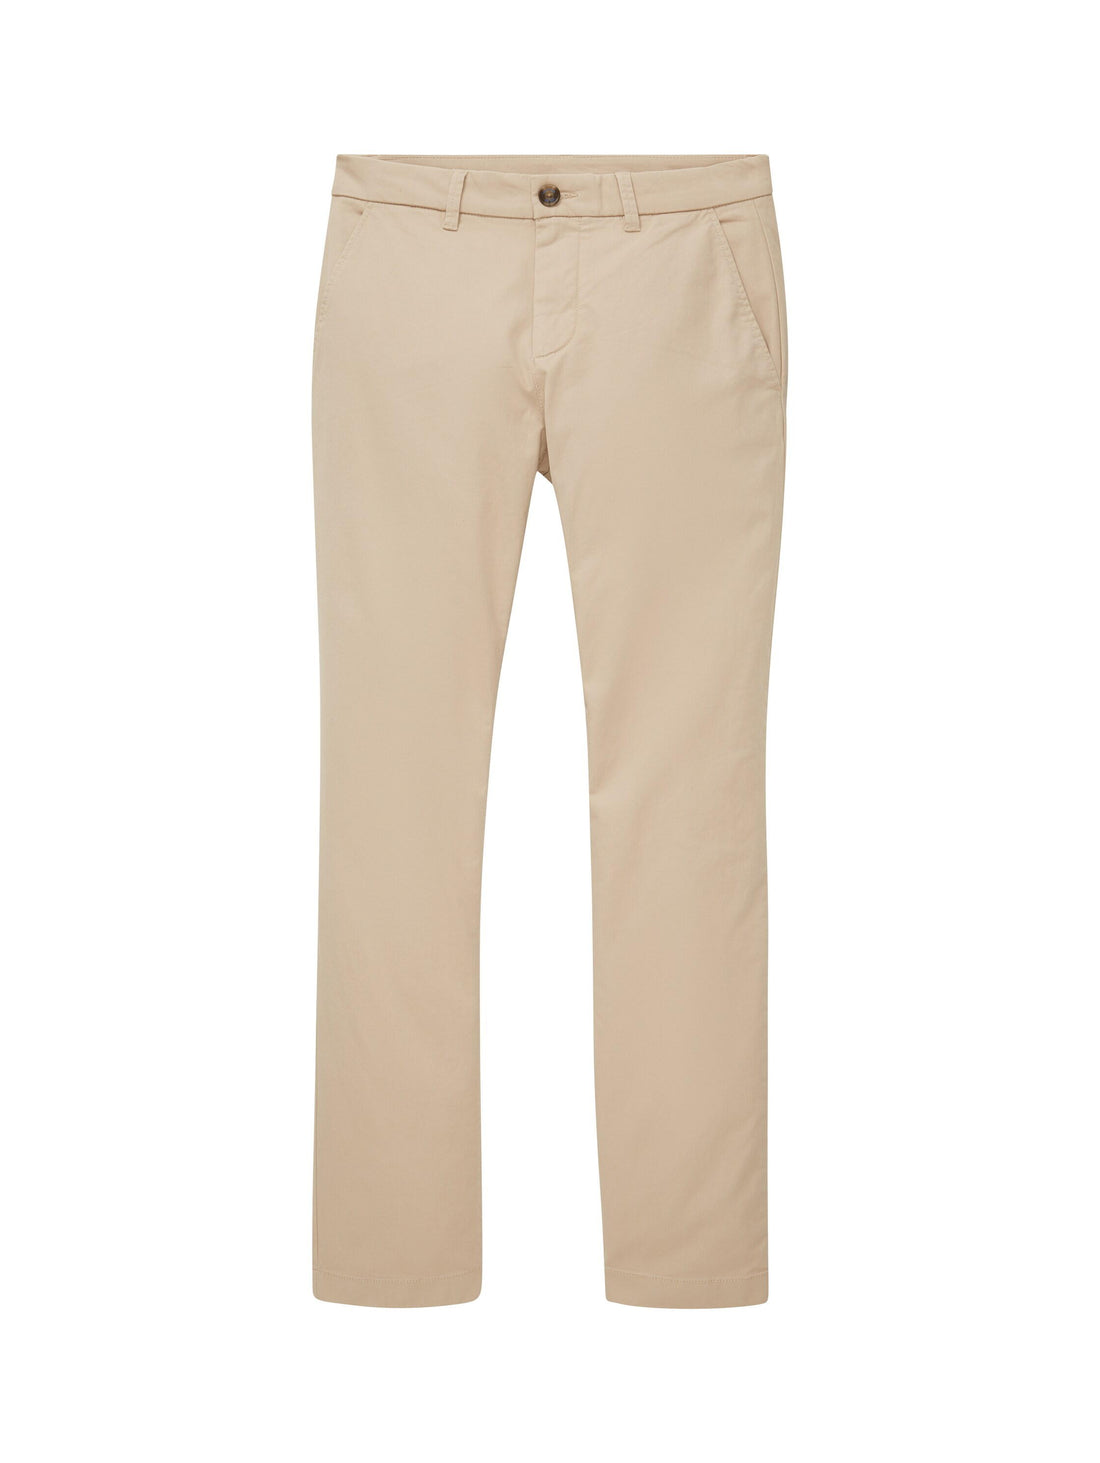 Regular Washed Chino In 2 Lengths_1040240_11704_02